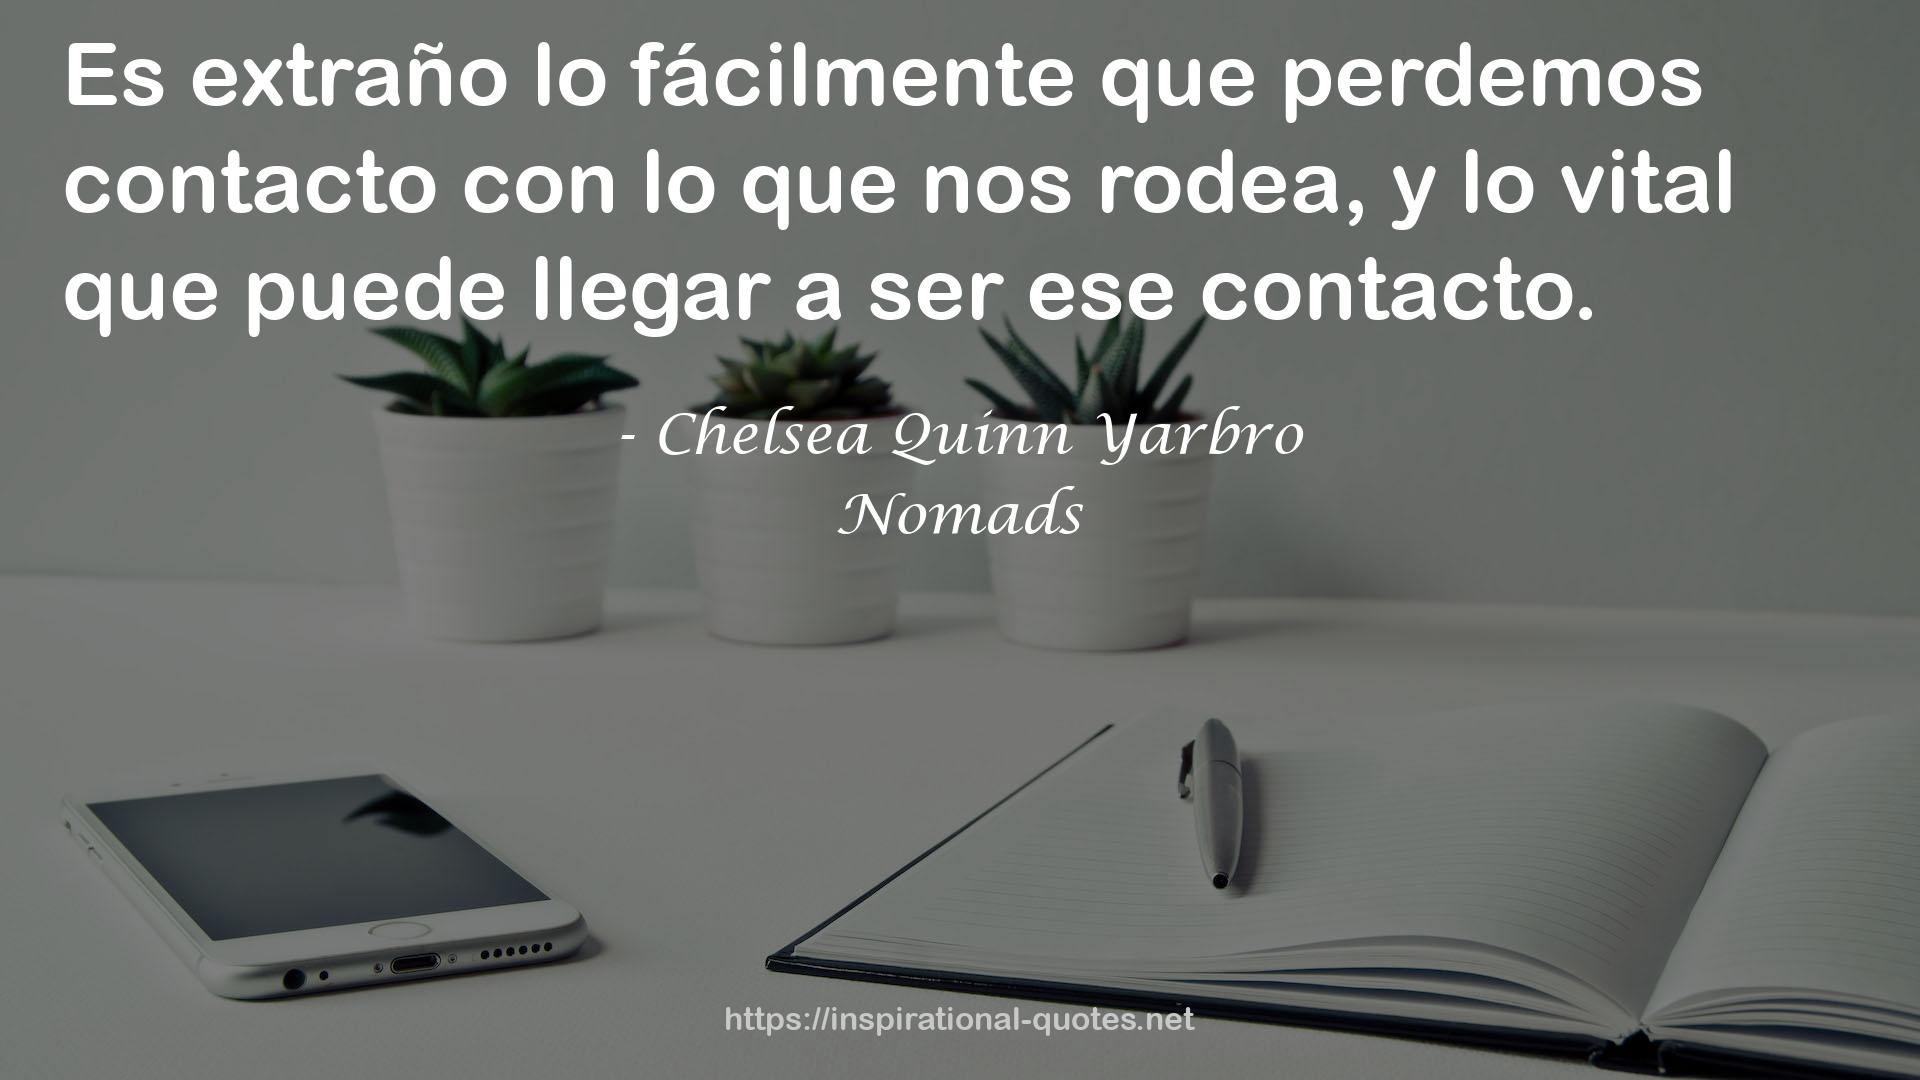 Nomads QUOTES